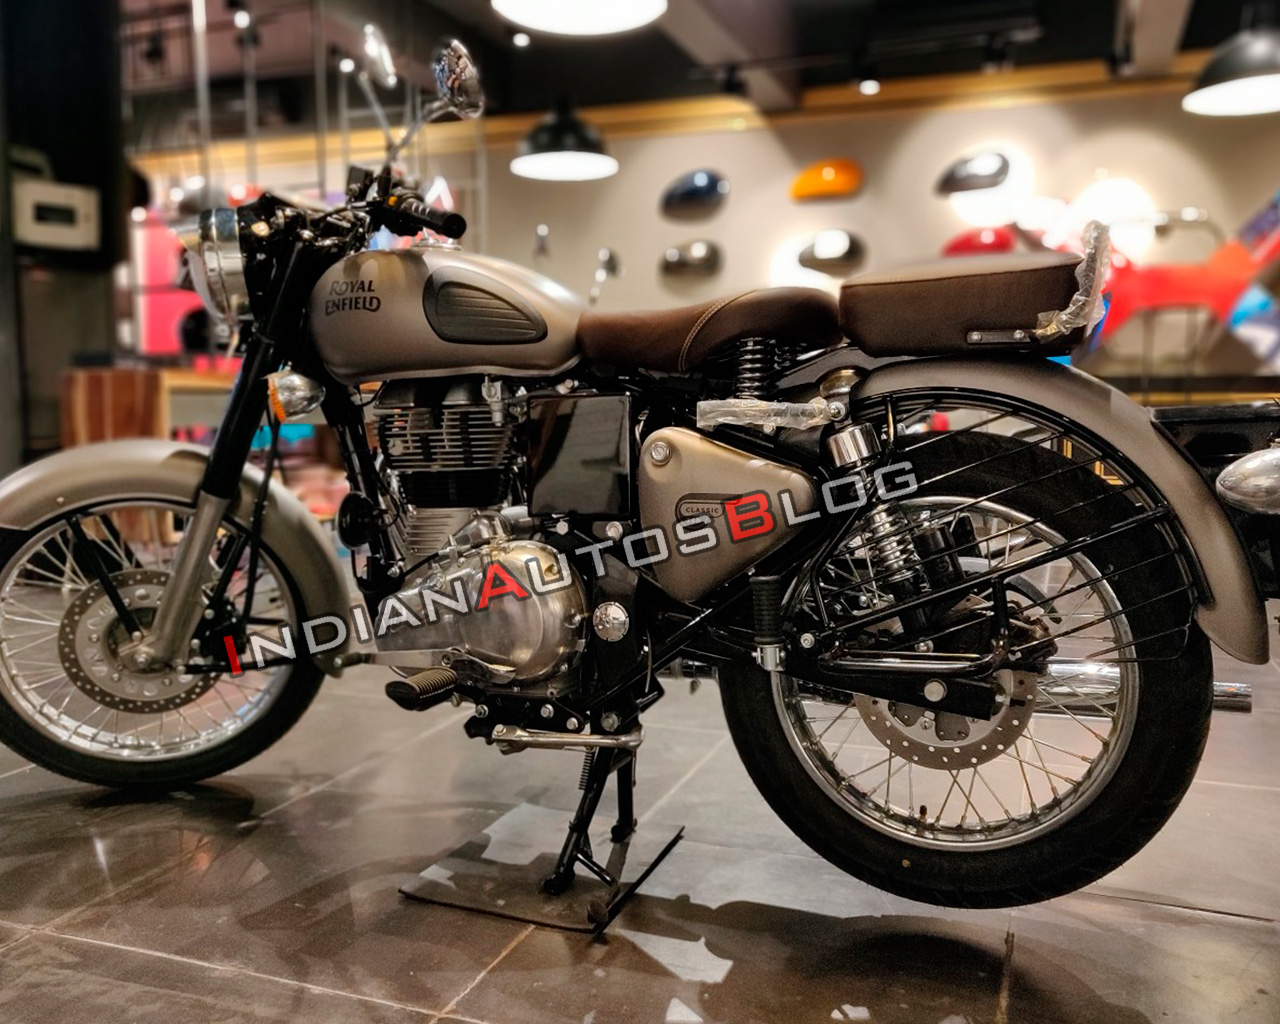 royal enfield classic price